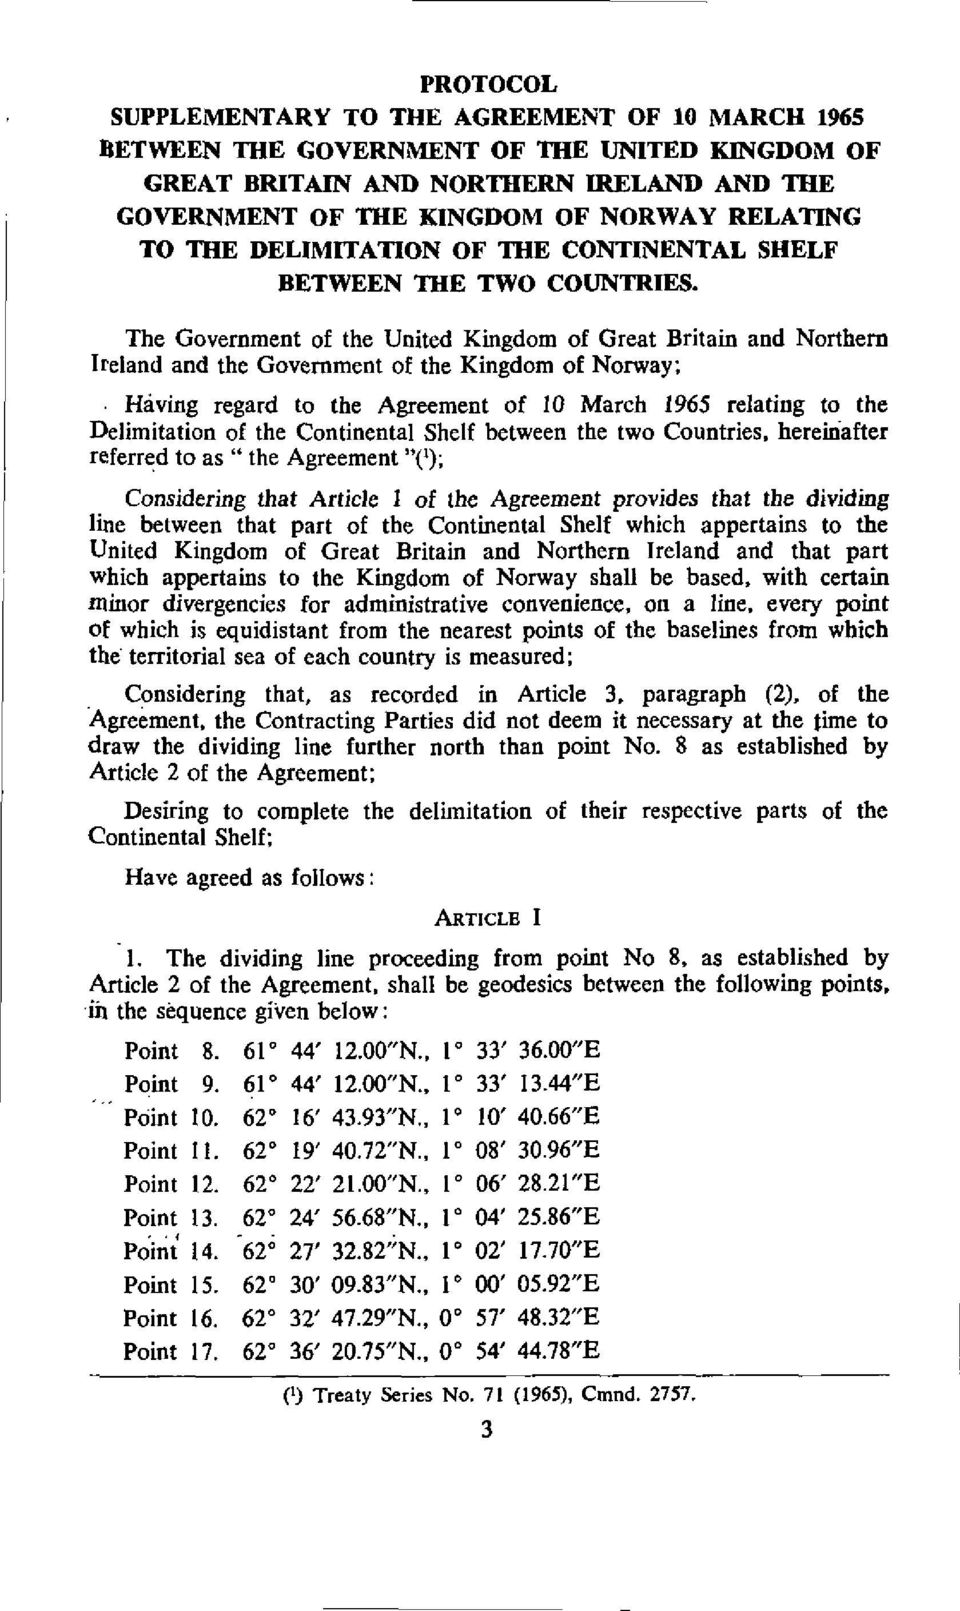 The Government of the United Kingdom of Great Britain and Northern Ireland and the Government of the Kingdom of Norway; Having regard to the Agreement of 10 March 1965 relating to the Delimitation of